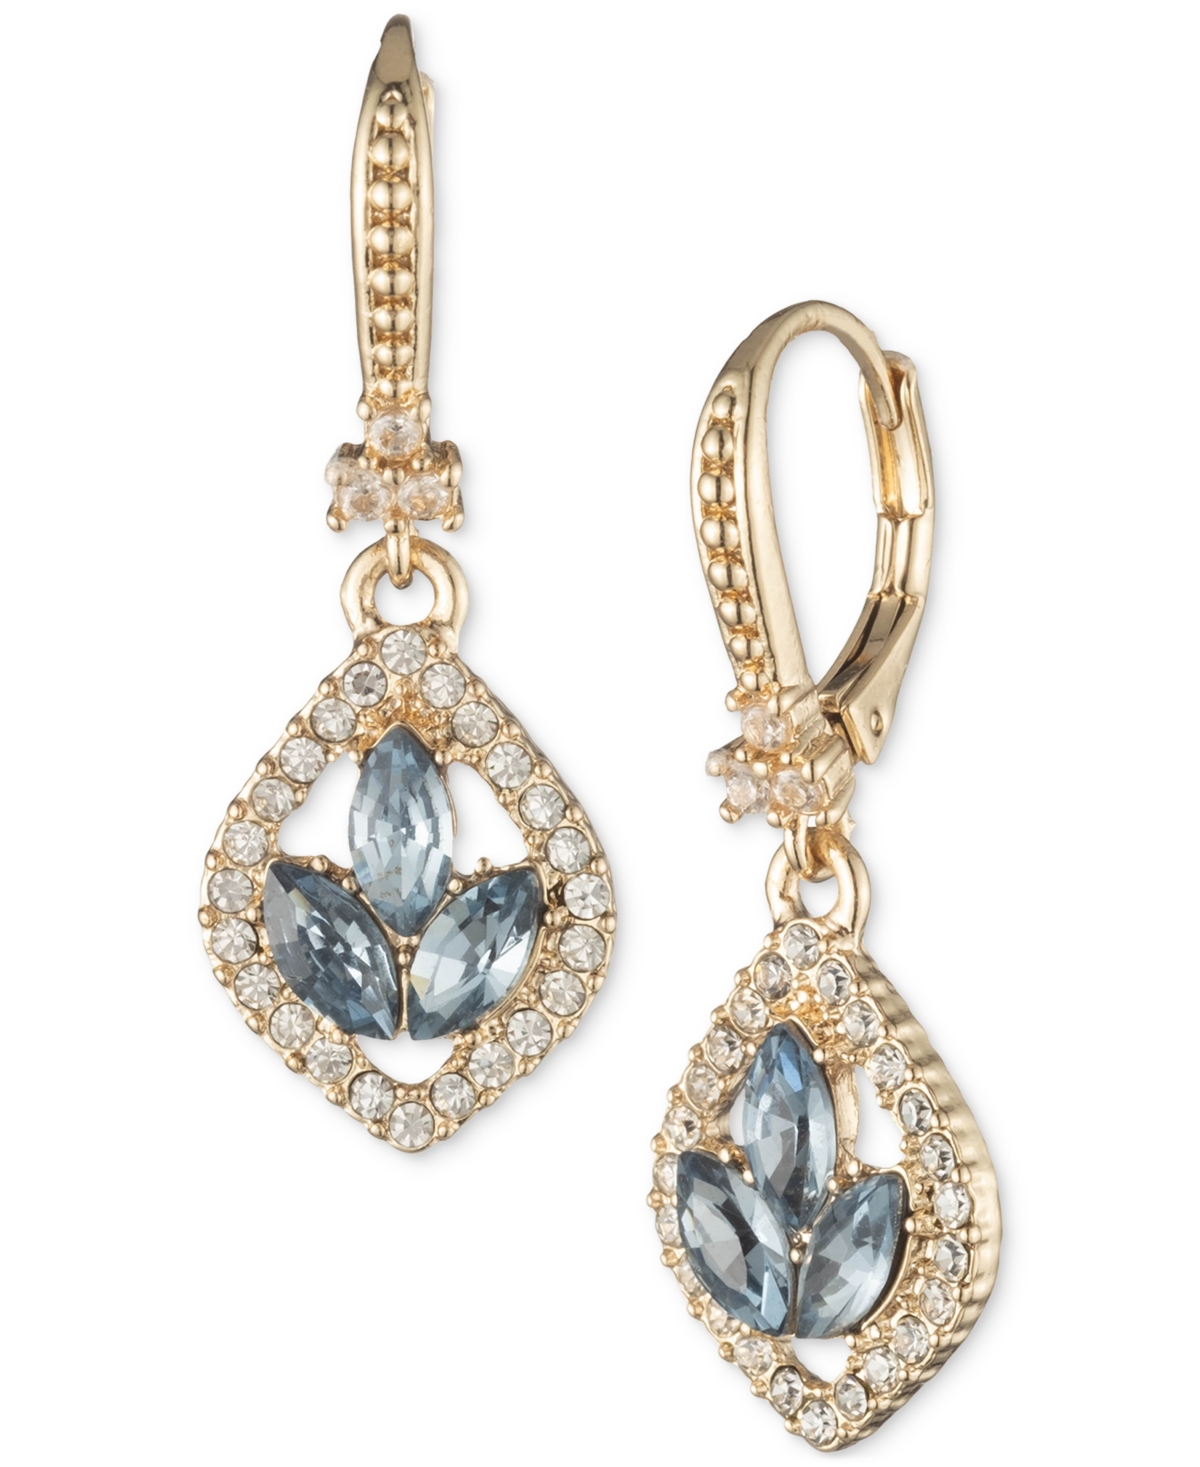 MARCHESA GOLD-TONE PAVE & COLOR CRYSTAL DROP EARRINGS